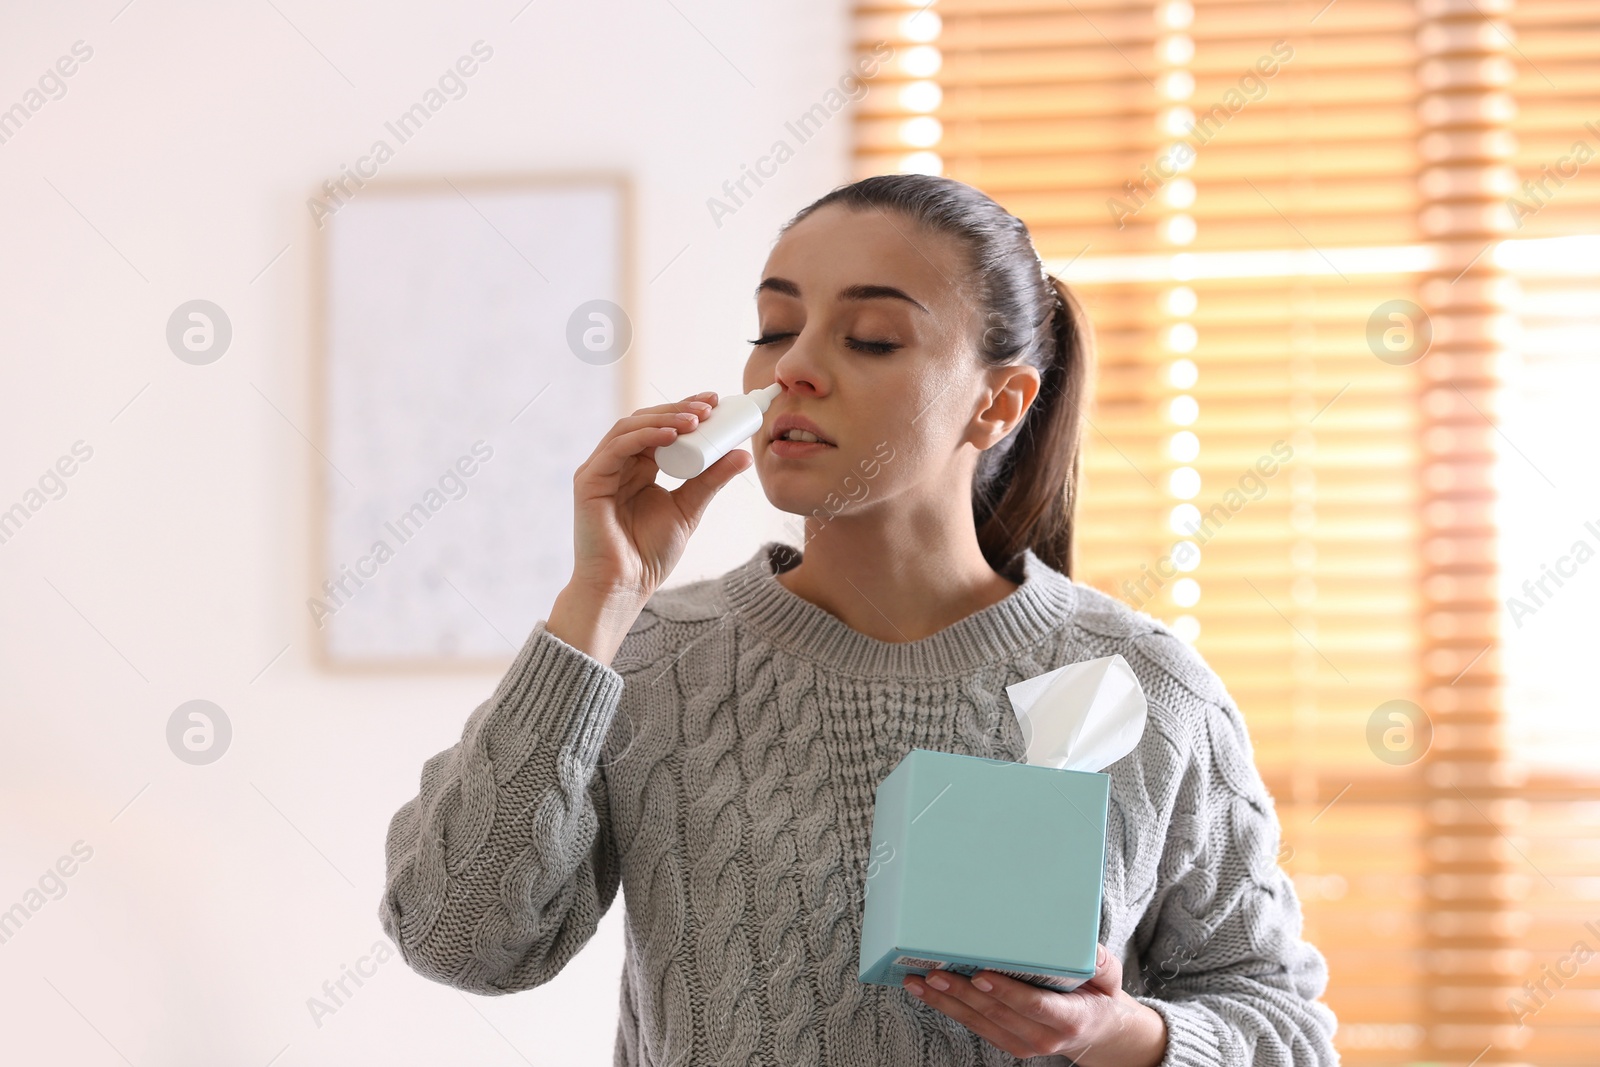 Photo of Ill woman with box of paper tissues using nasal spray at home